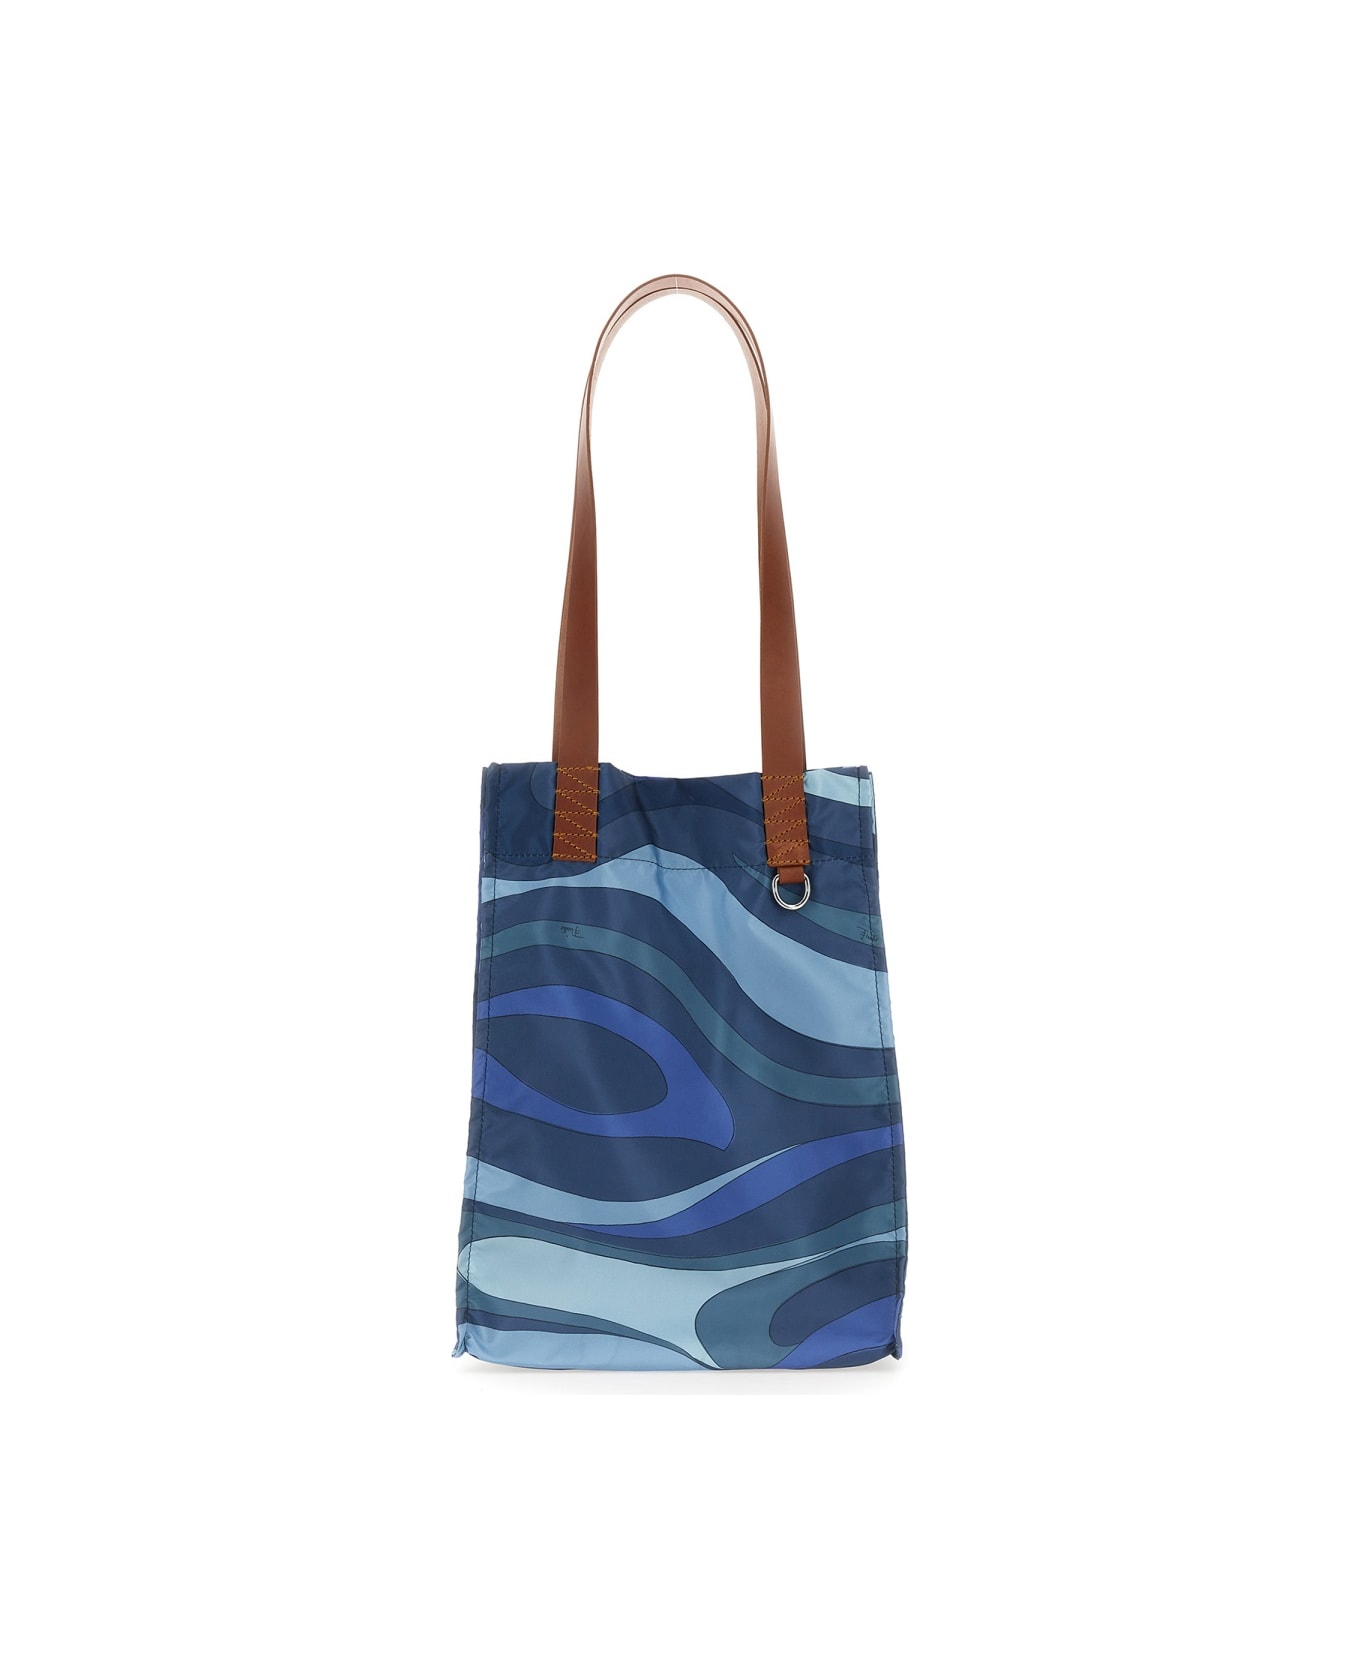 Pucci Patterned Tote Bag - BLUE